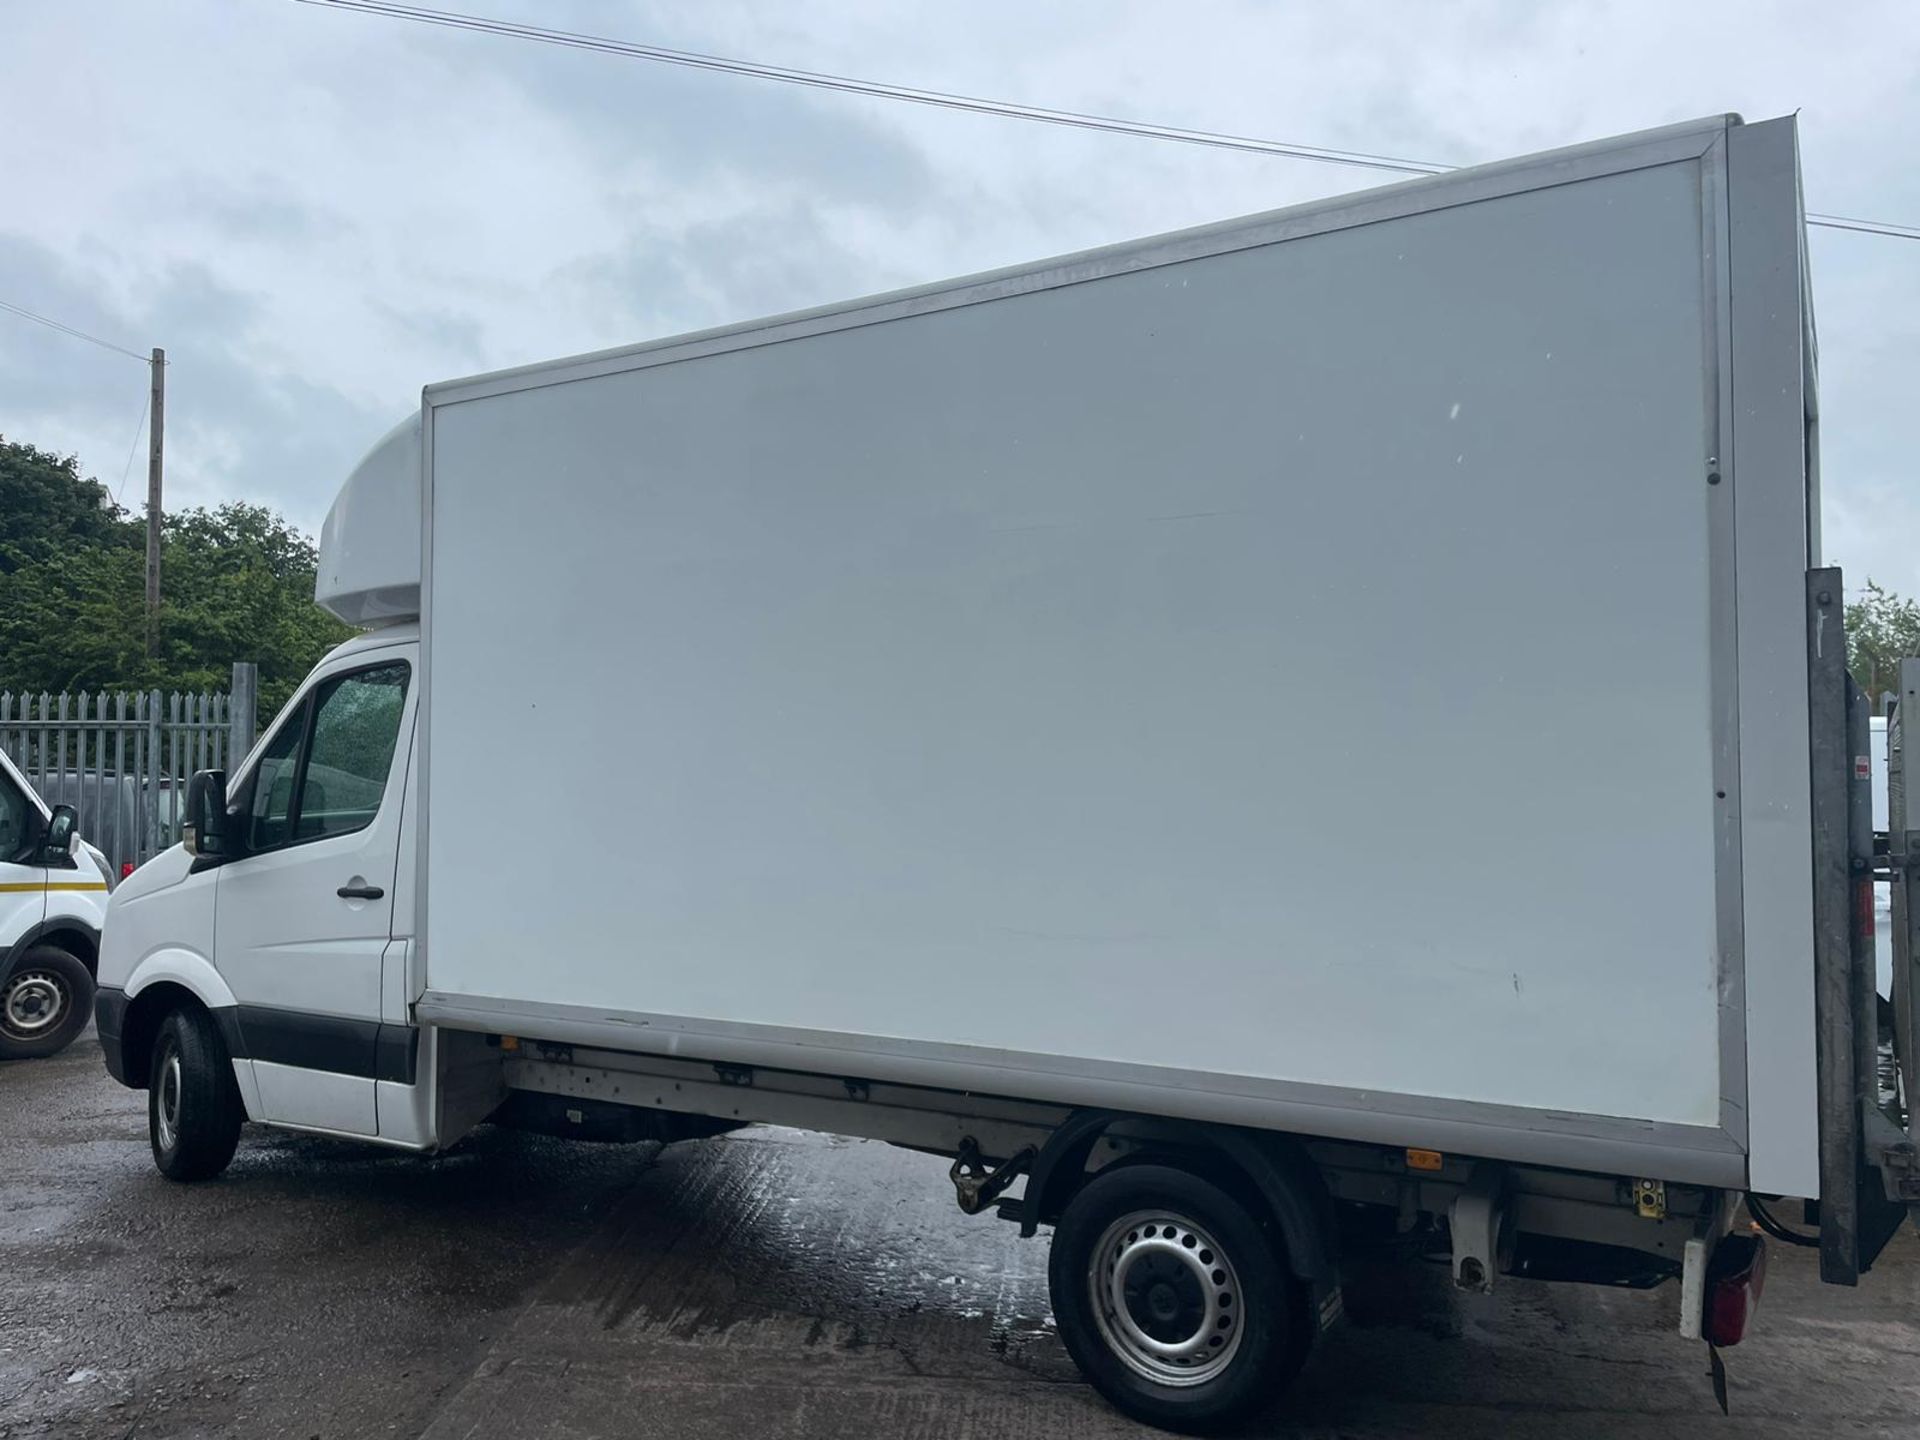 2015 VOLKSWAGEN CRAFTER LUTON VAN WITH TAIL LIFT - 2.0 TDI ENGINE - 144,876 MILES - Image 3 of 9